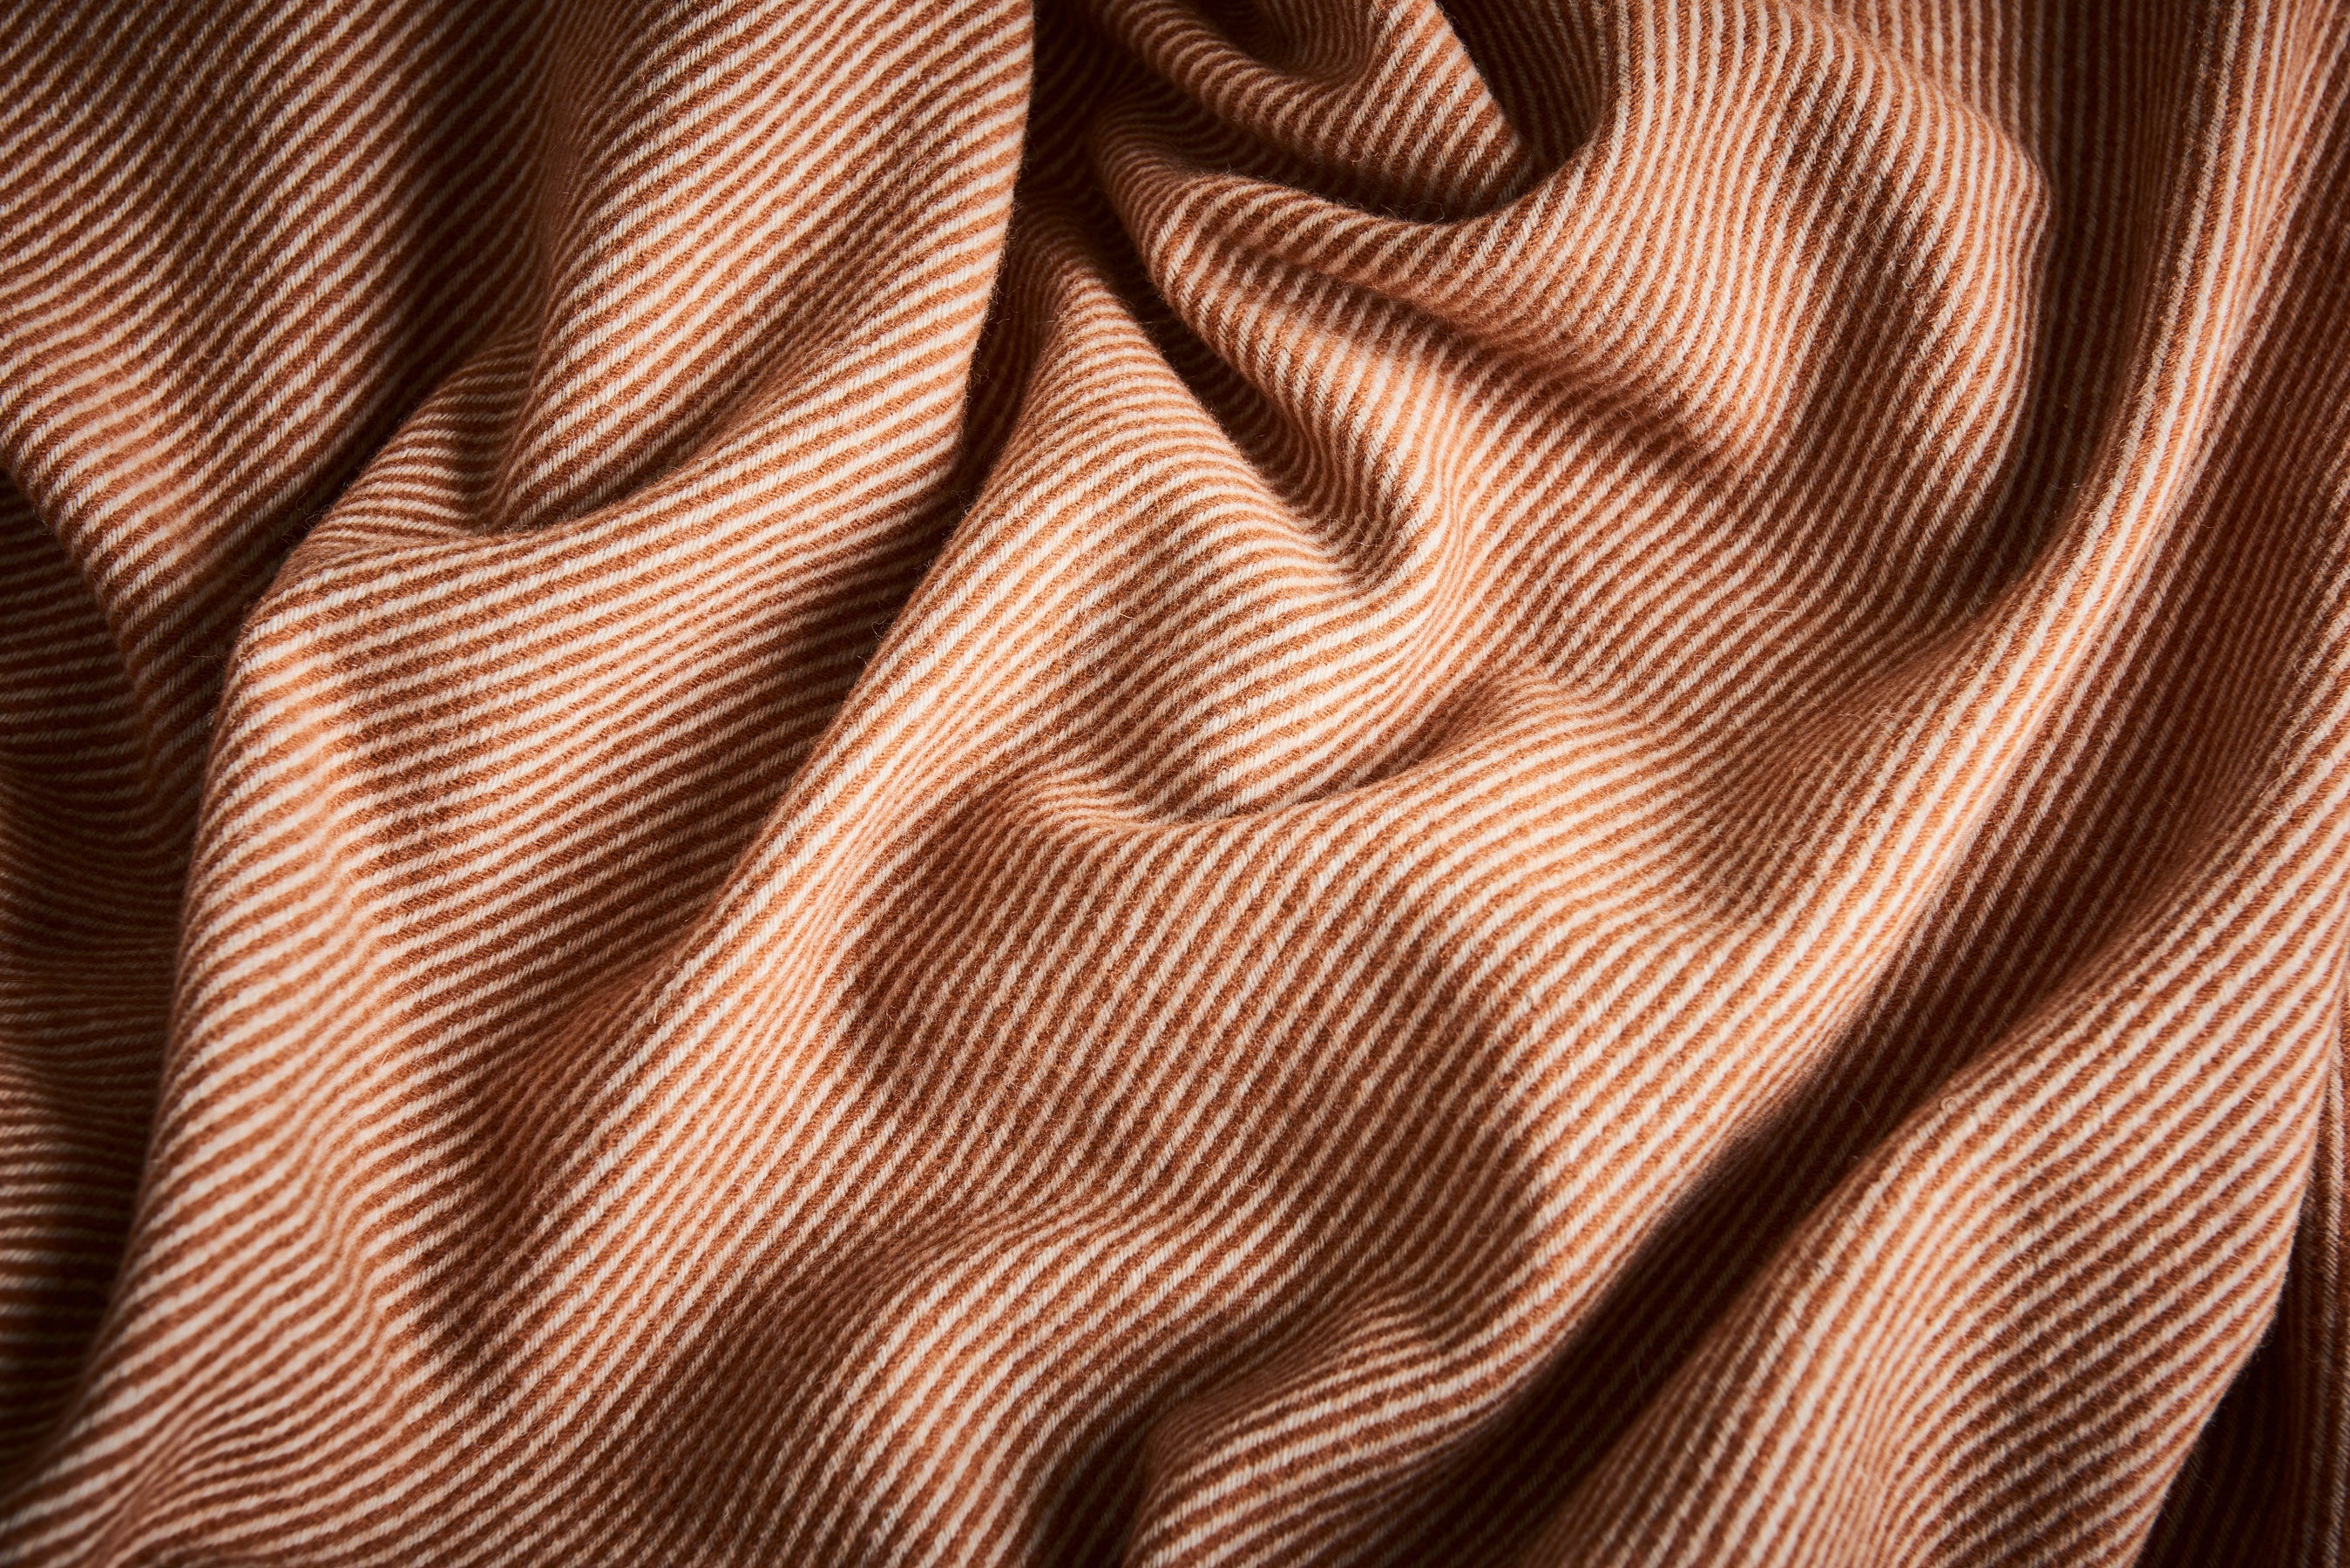 A close up of the chunky twill weave of the diagonal throw.